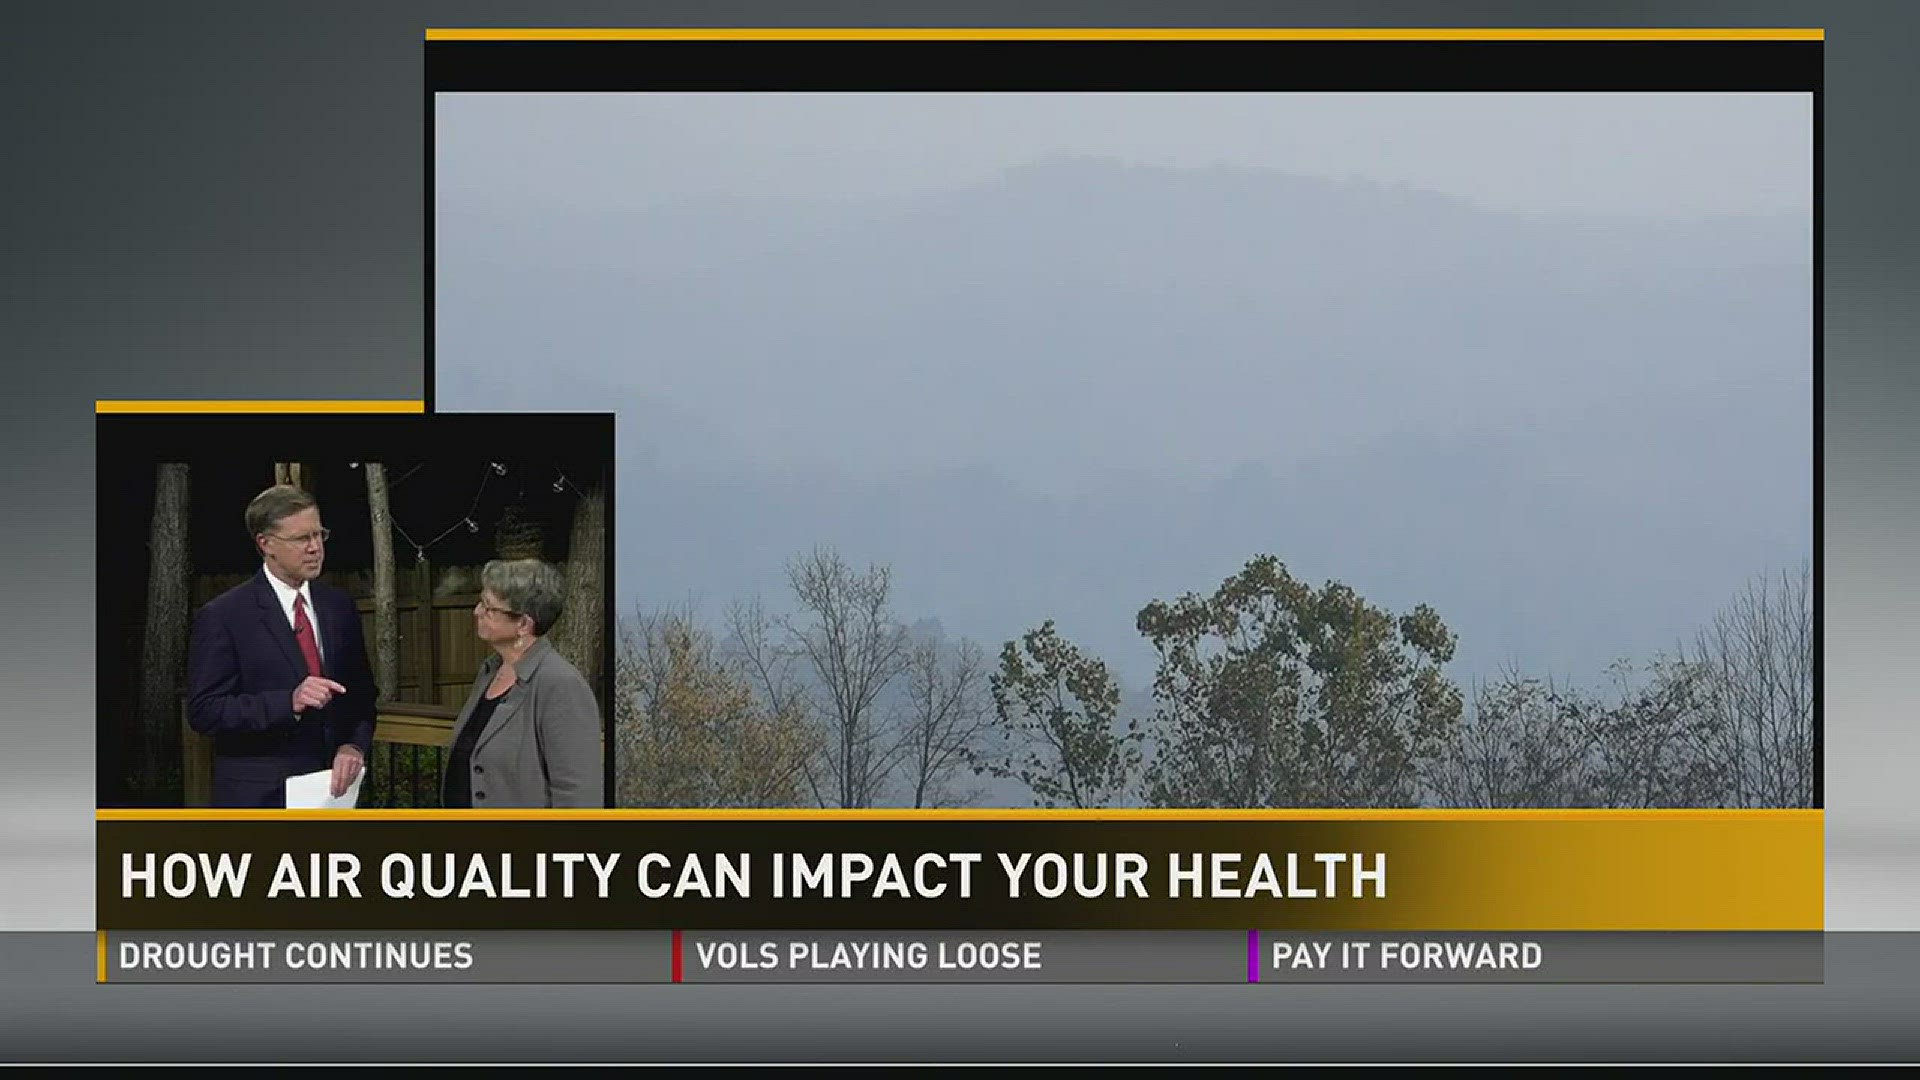 Nov. 8, 2016: East Tennessee is still under an Air Quality Alert Tuesday. Dr. Martha Buchanan with the Knox County Health Department explains how the air quality can impact your health.